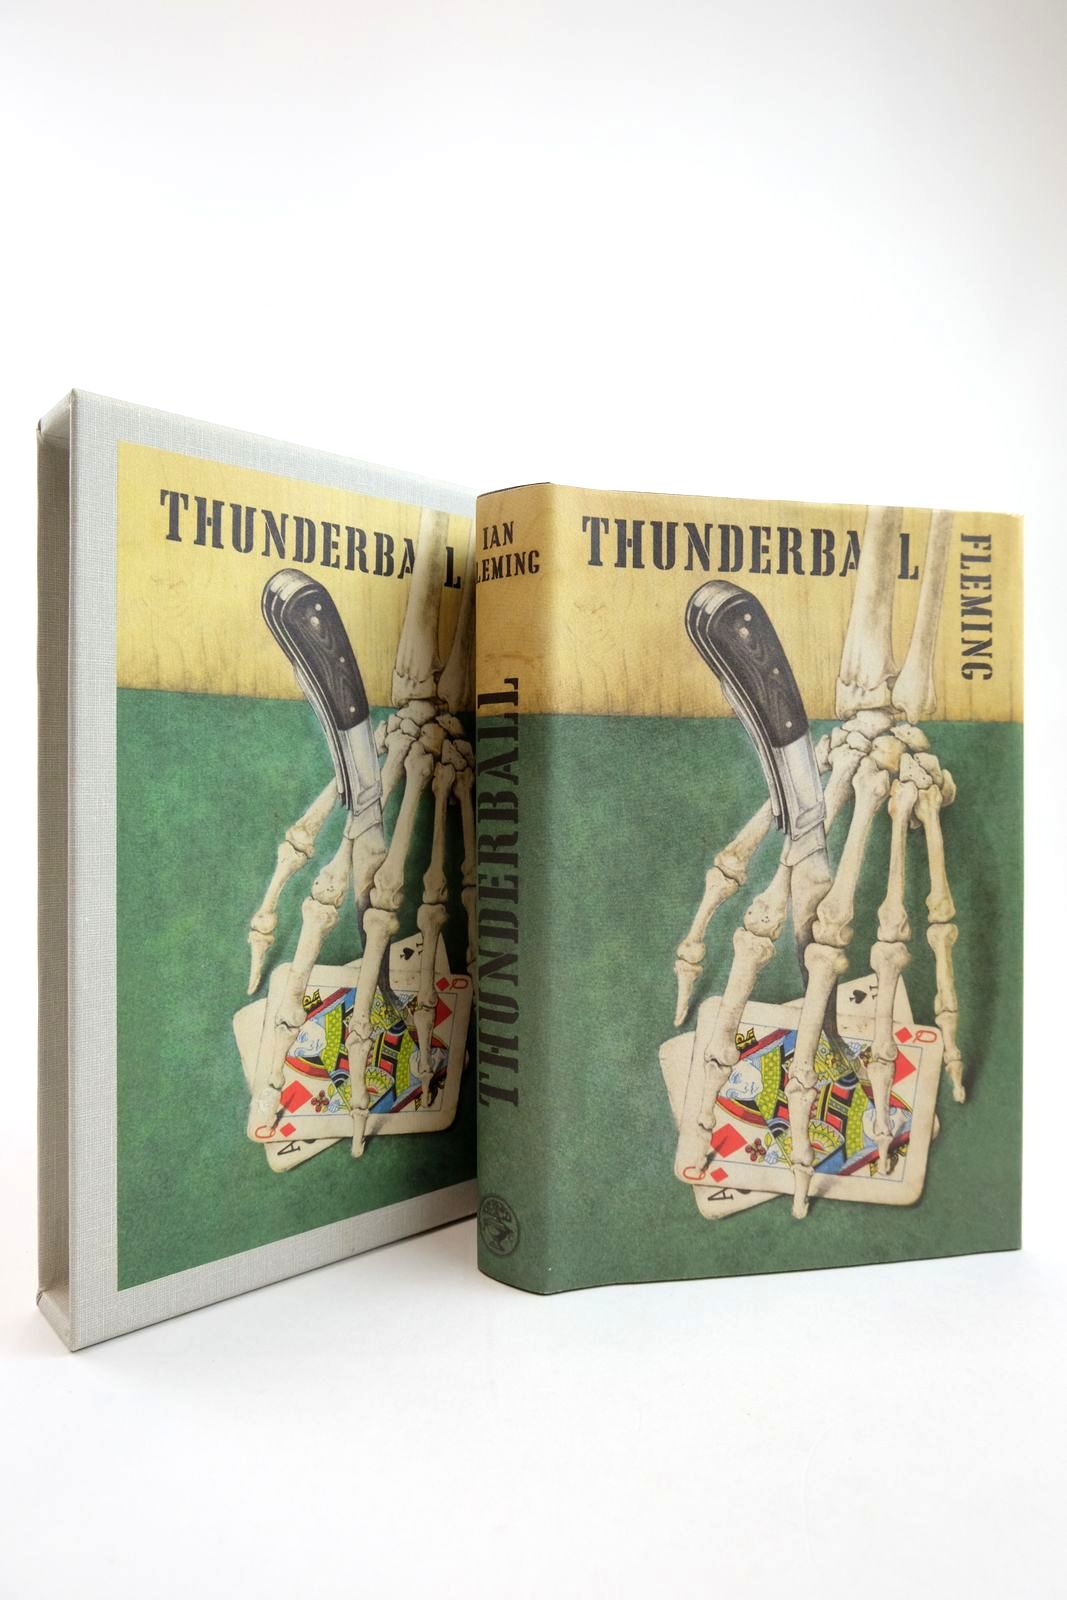 Photo of THUNDERBALL written by Fleming, Ian published by The First Edition Library, Jonathan Cape (STOCK CODE: 2134195)  for sale by Stella & Rose's Books